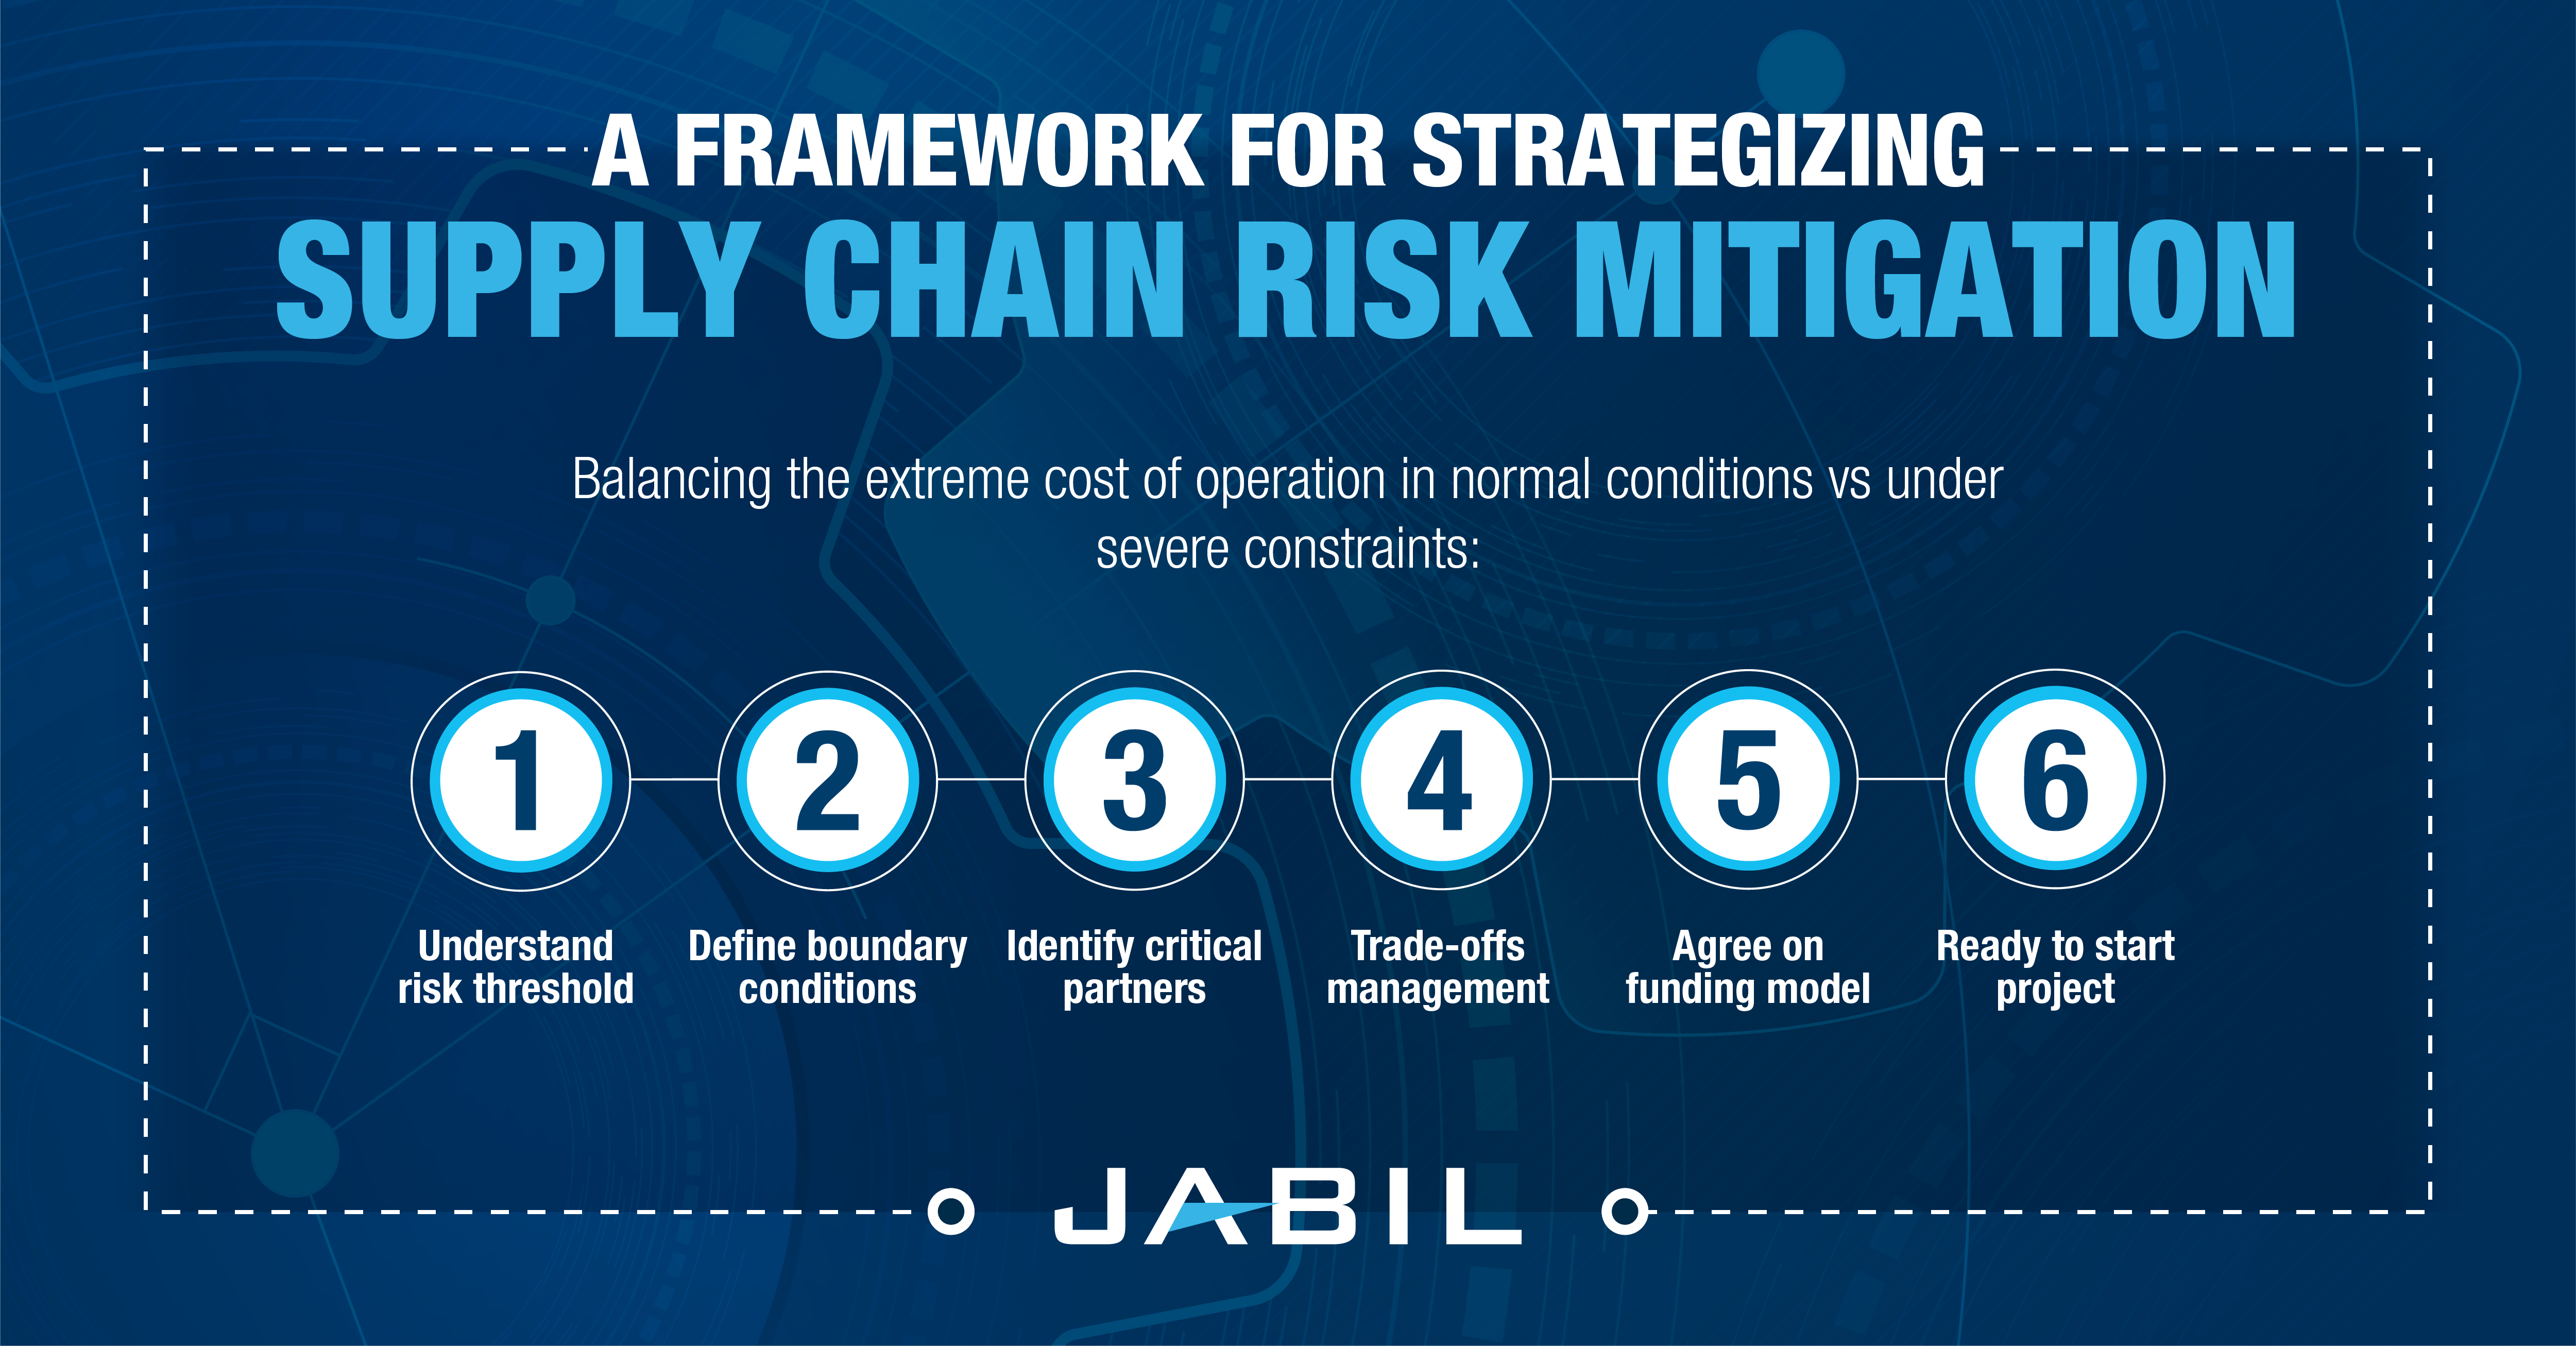 six-steps-for-identifying-and-managing-supply-chain-risk-jabil-2023